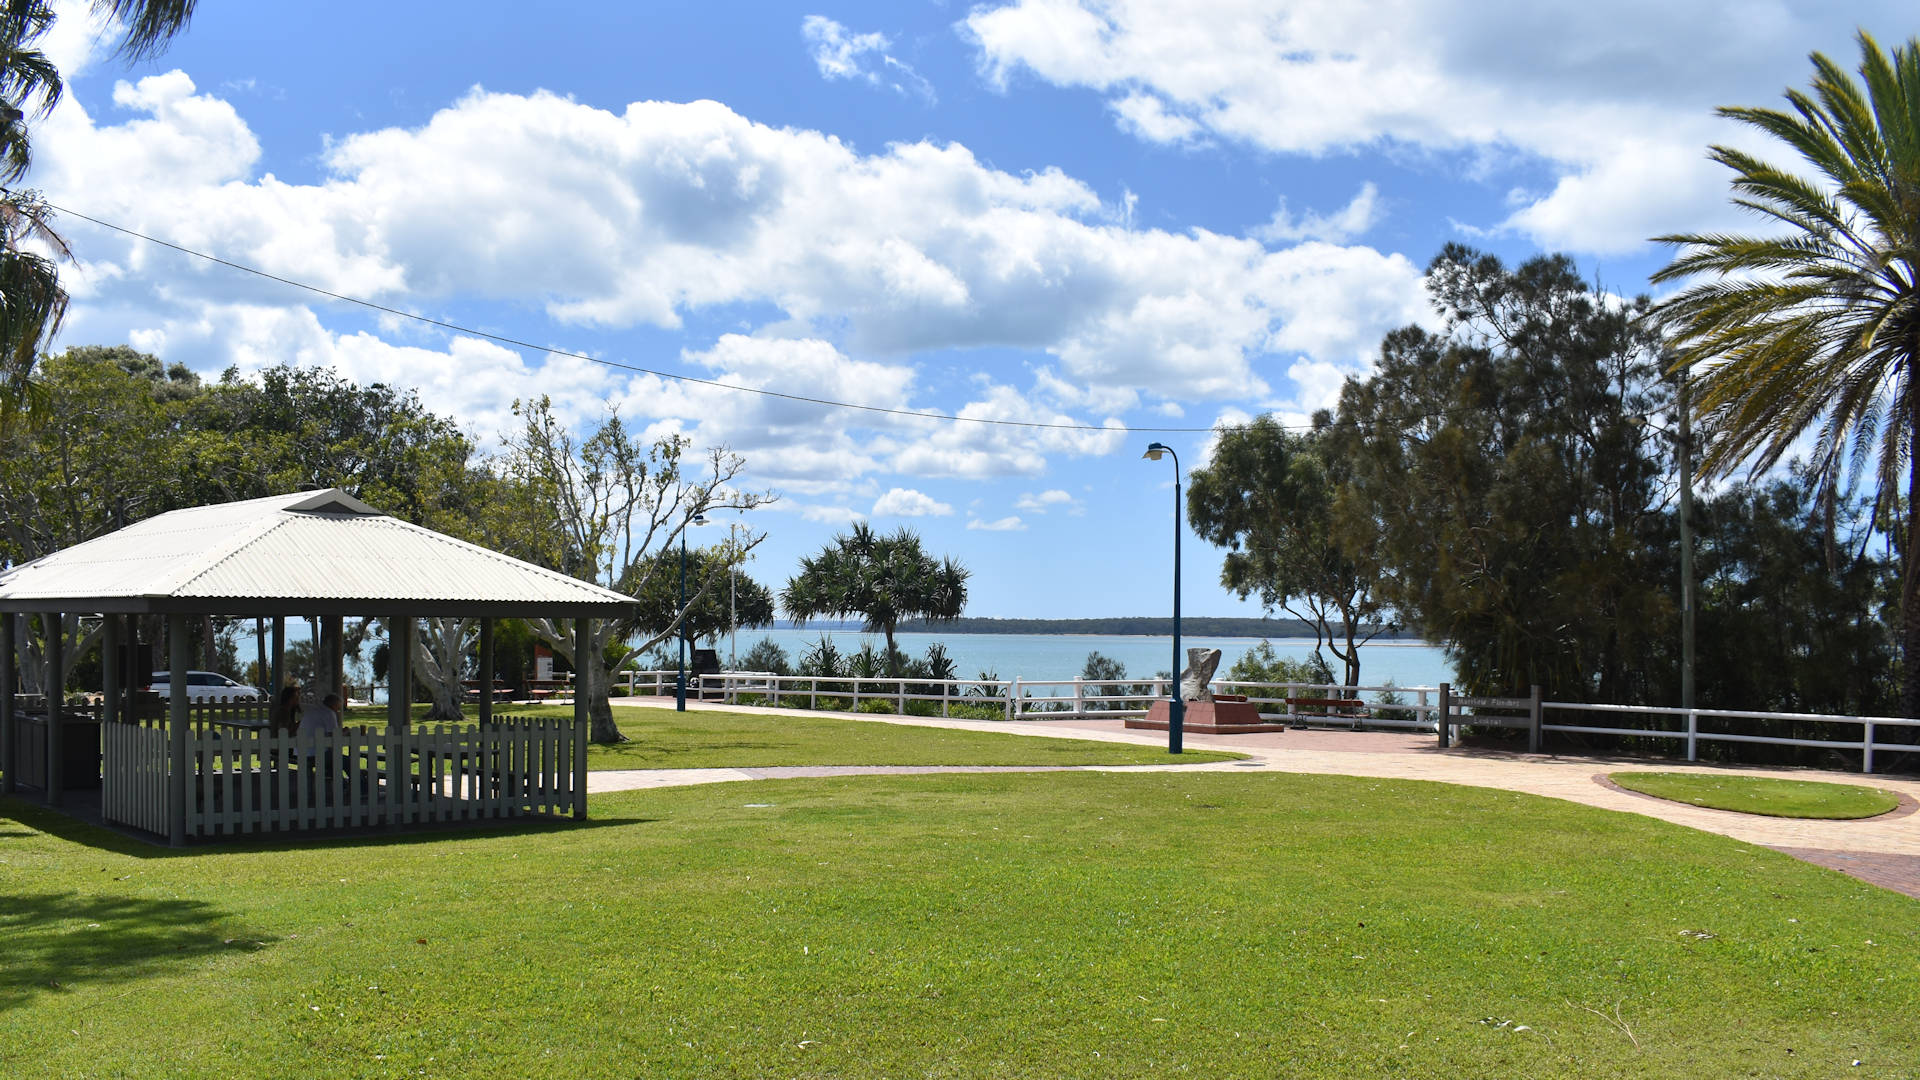 Green grass area with a picnic table and BBQ shelter, bay water in the background, blue skies with scattered clouds, taken at Dayman Park in Hervey Bay